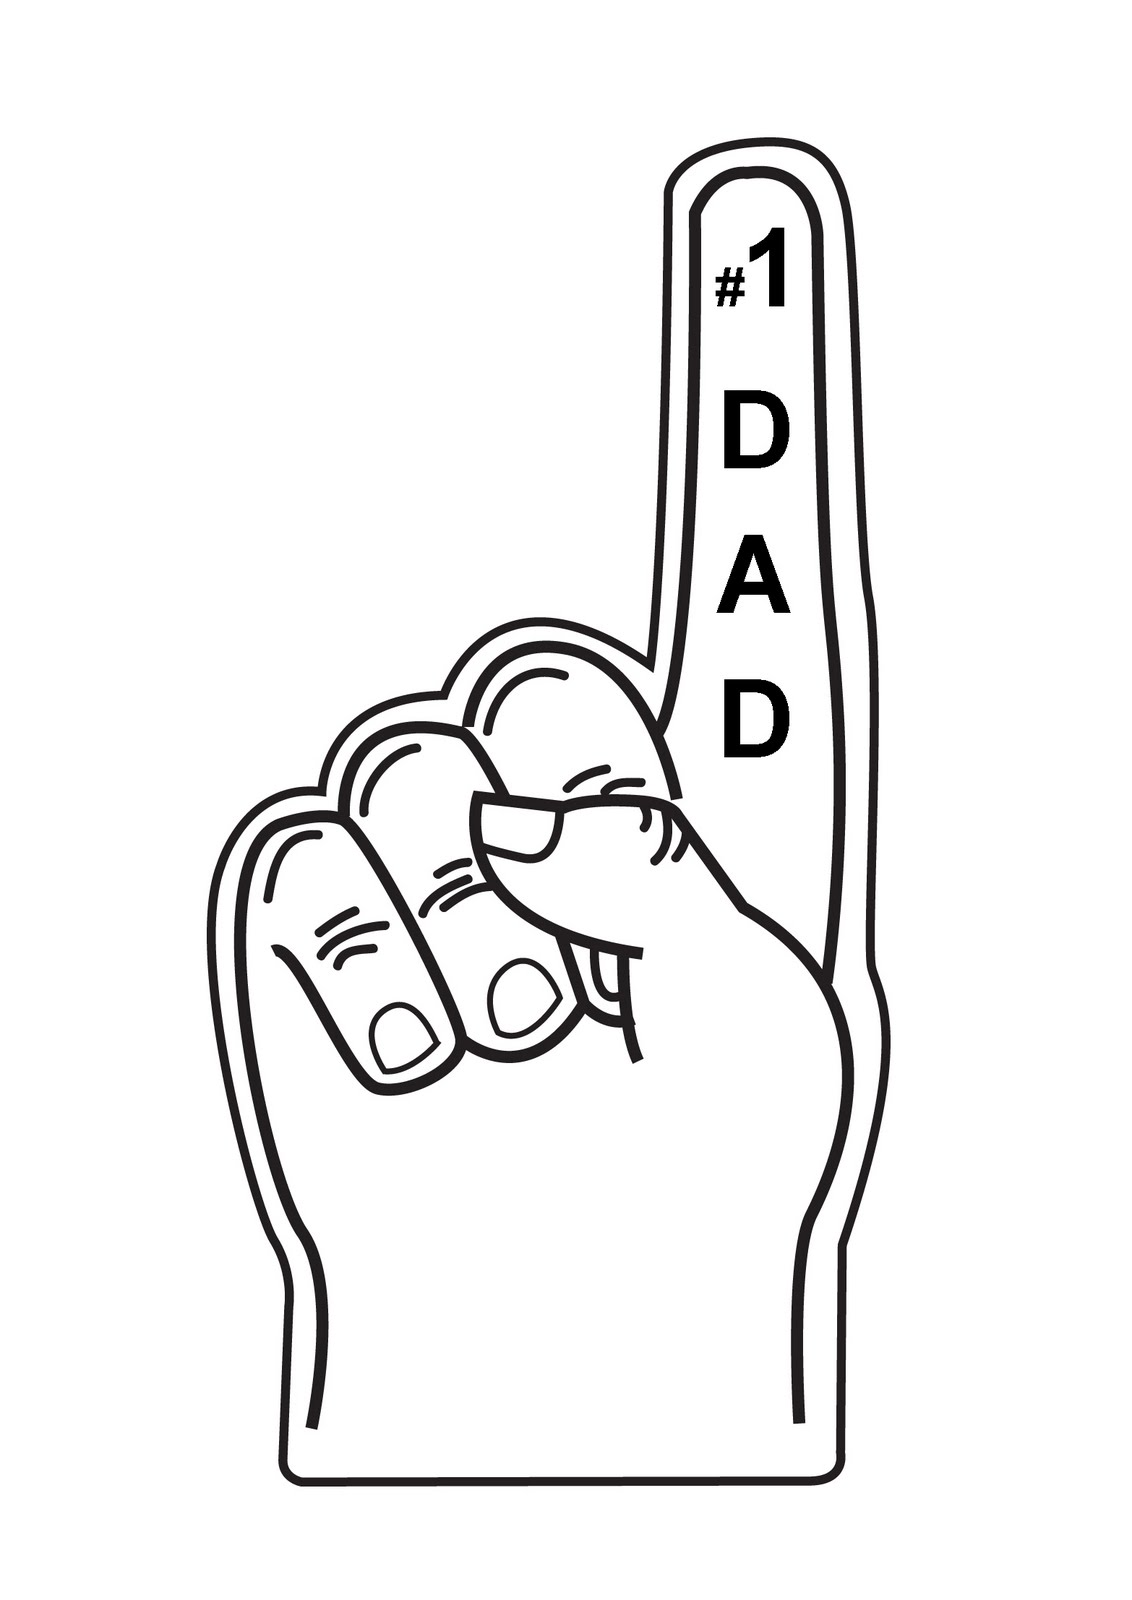 Created This Faux Foam Finger In Illustator  To Use Just Right